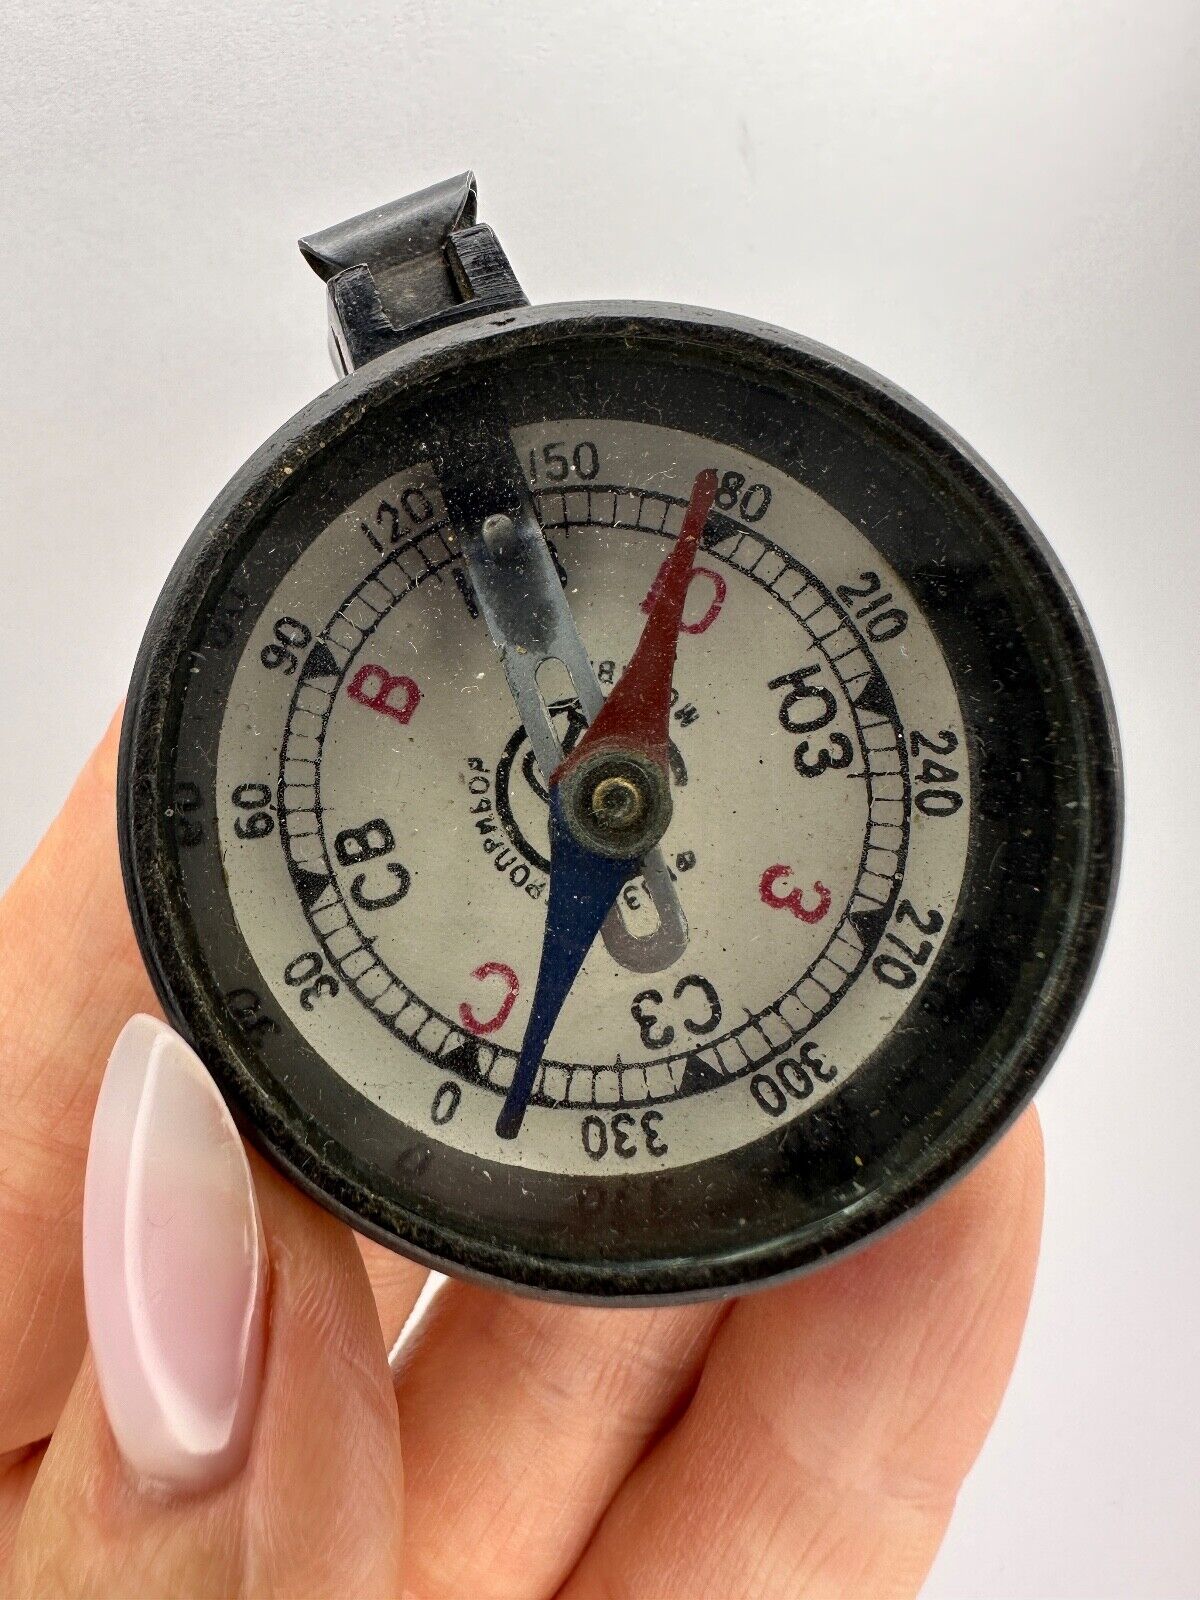 Compass Physelectropribor Moscow zad Karbolit Collectible Original Vintage USSR